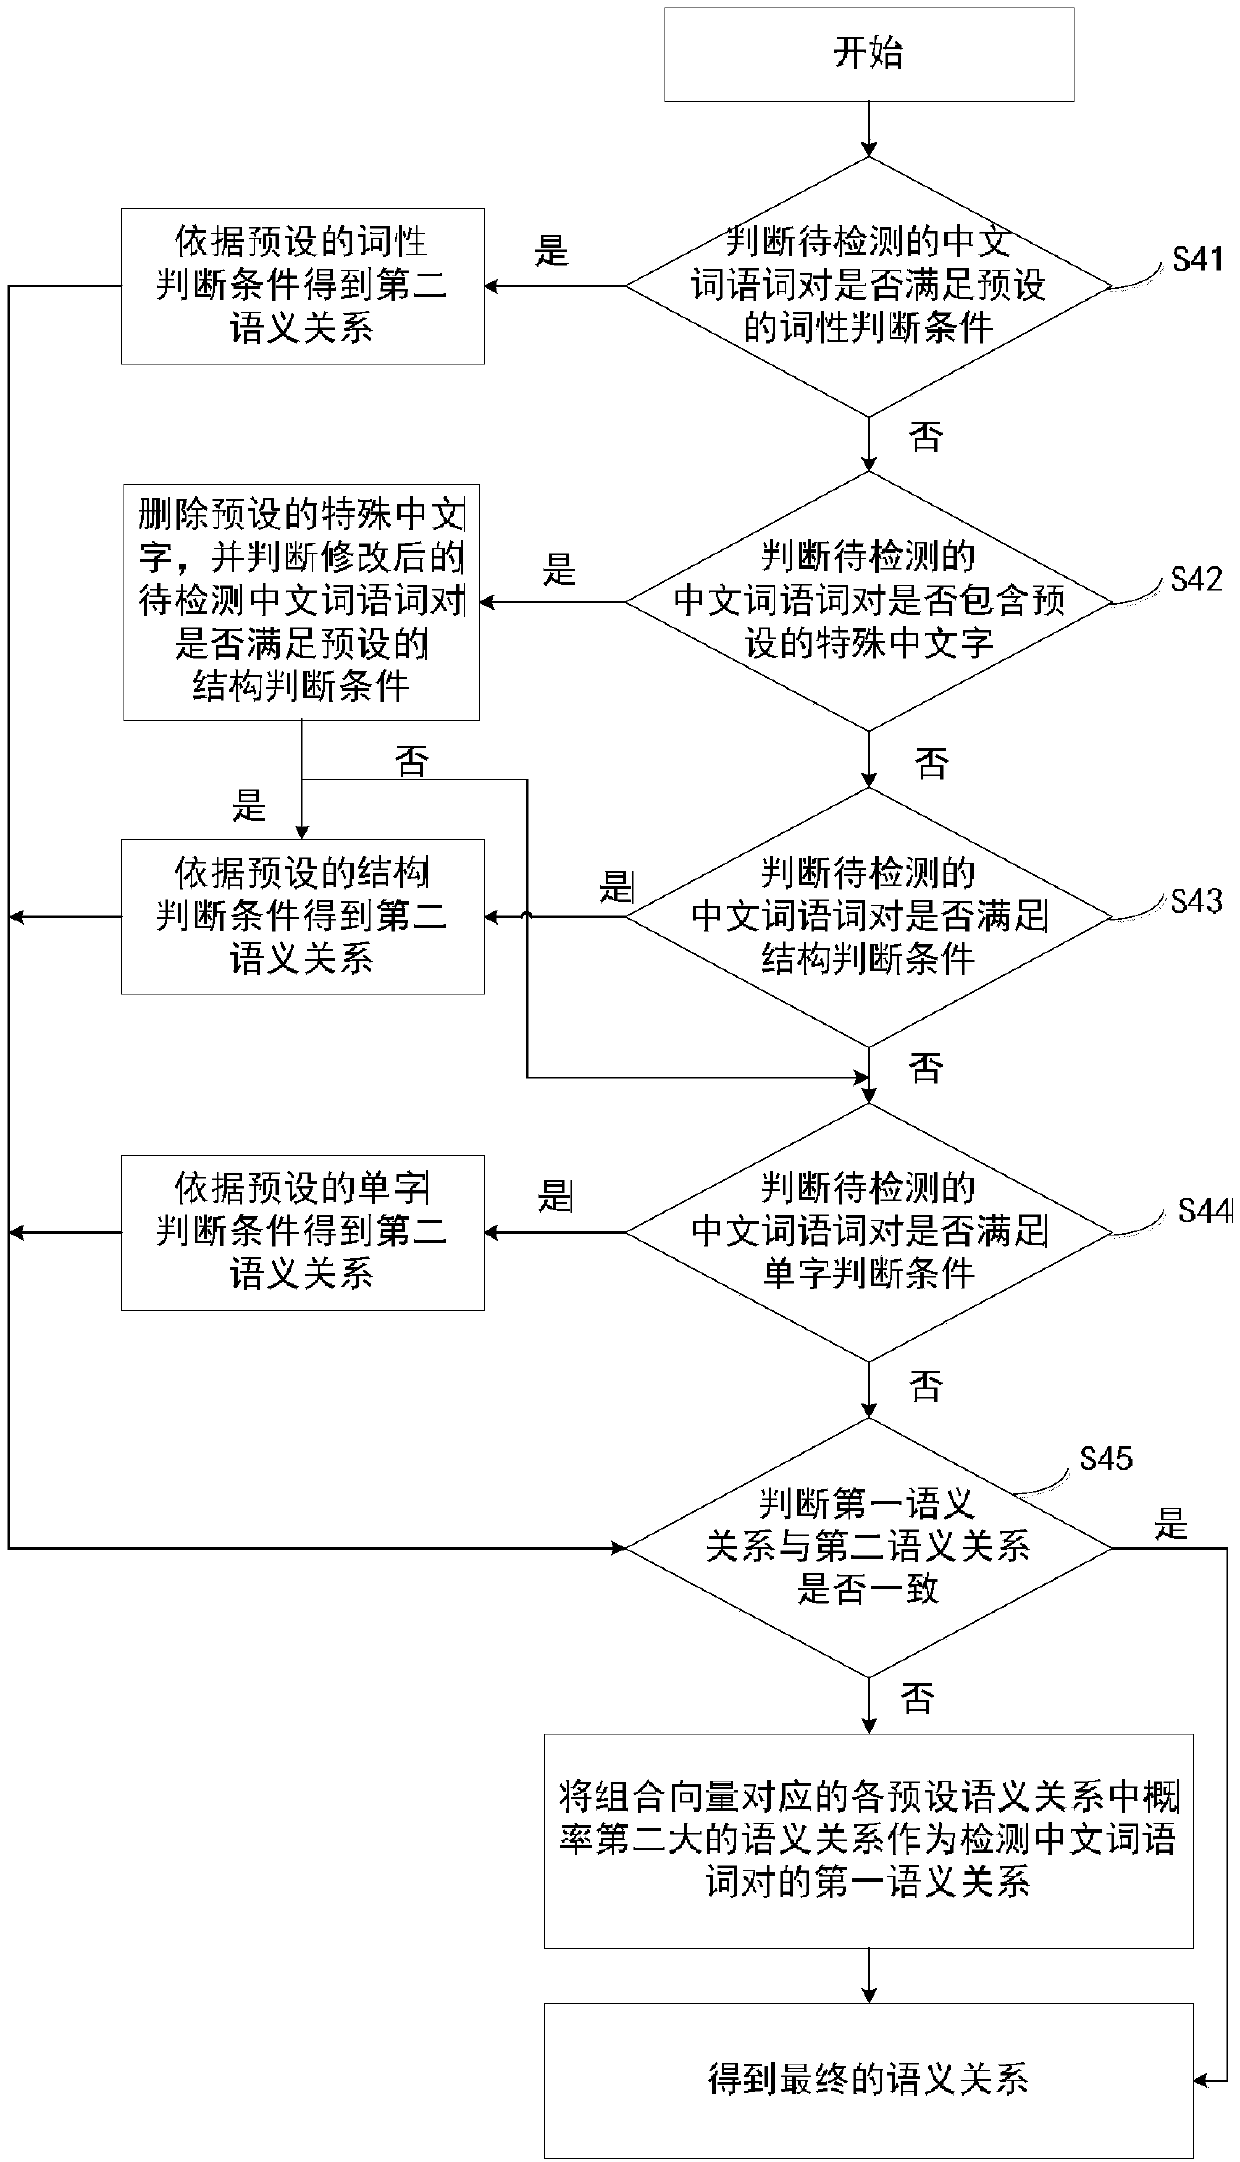 Chinese semantic relation recognition method and device